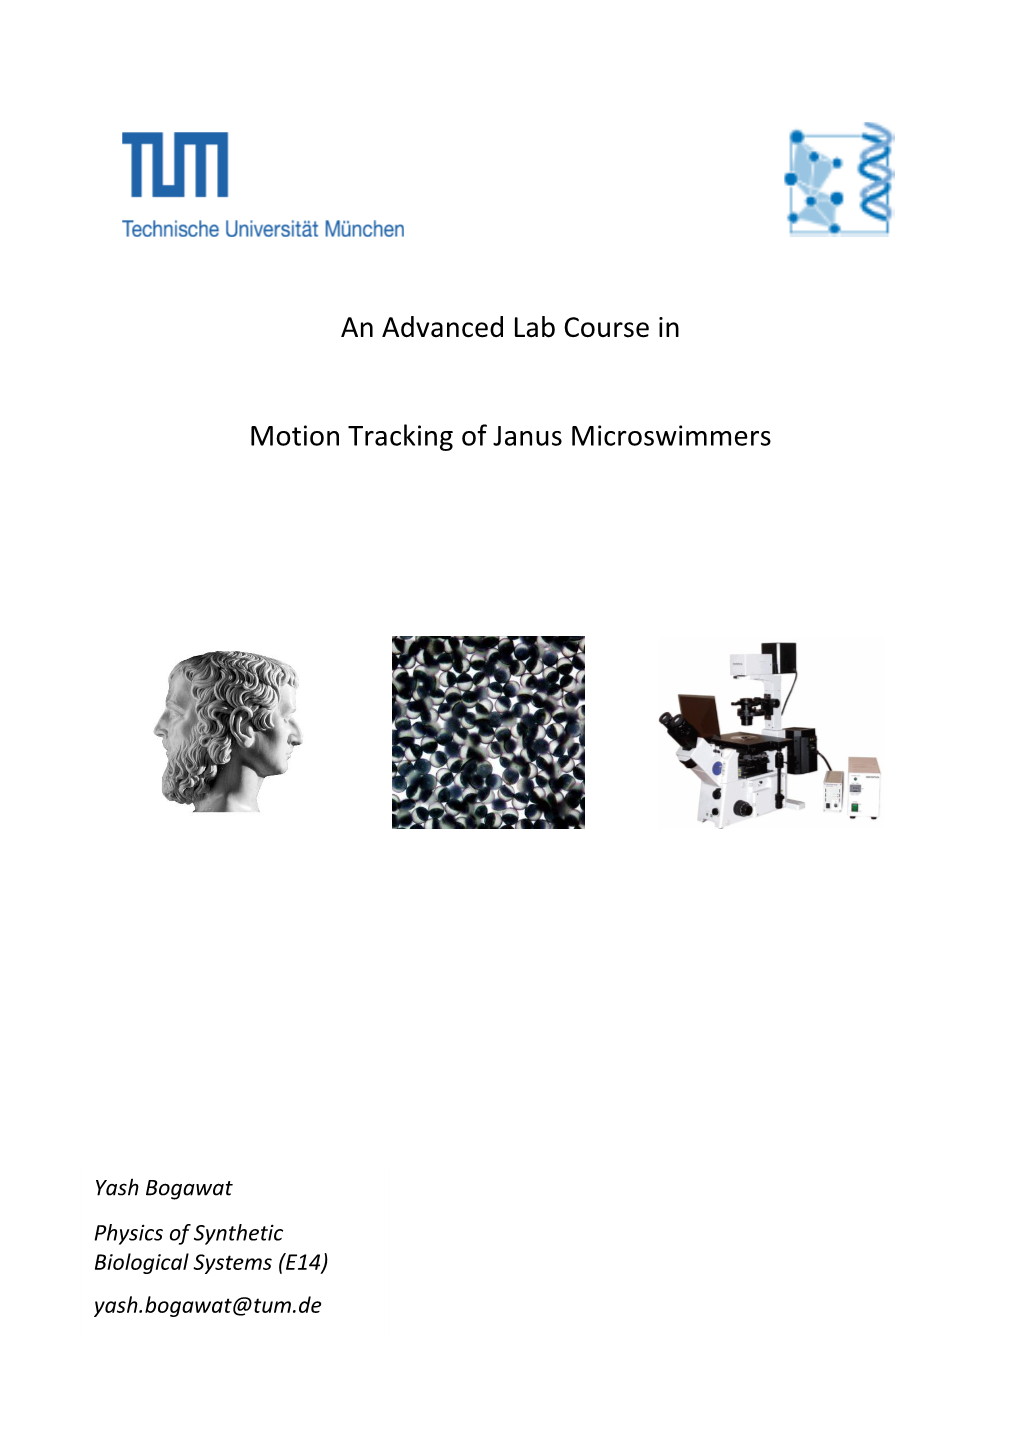 An Advanced Lab Course in Motion Tracking of Janus Microswimmers